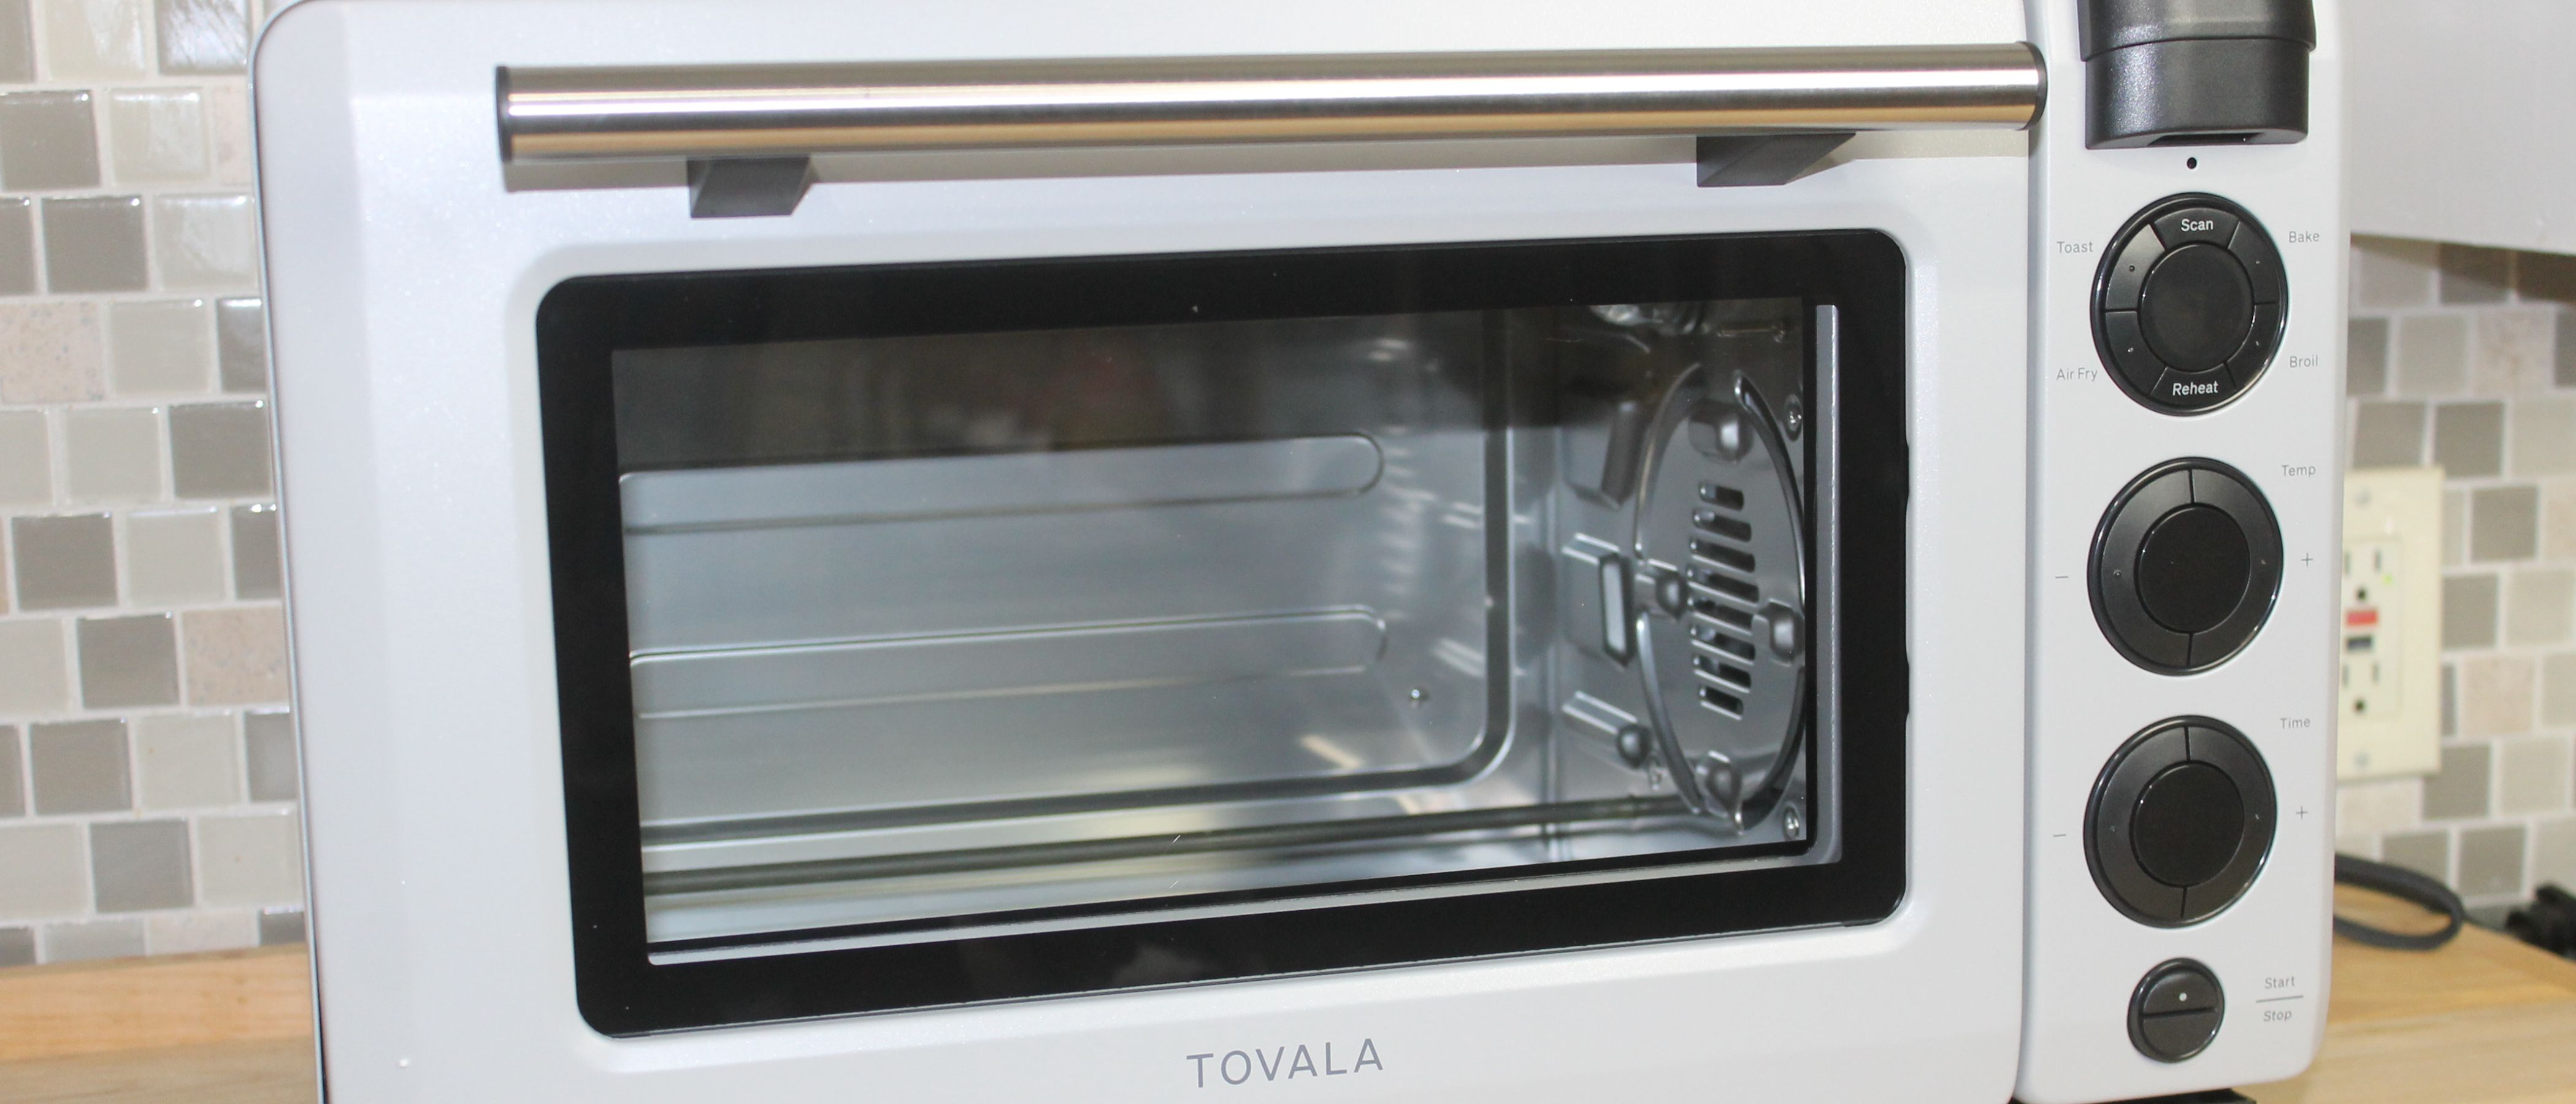 Tovala Smart Steam Countertop Oven w/ 4 Meat/Fish Meal Kits